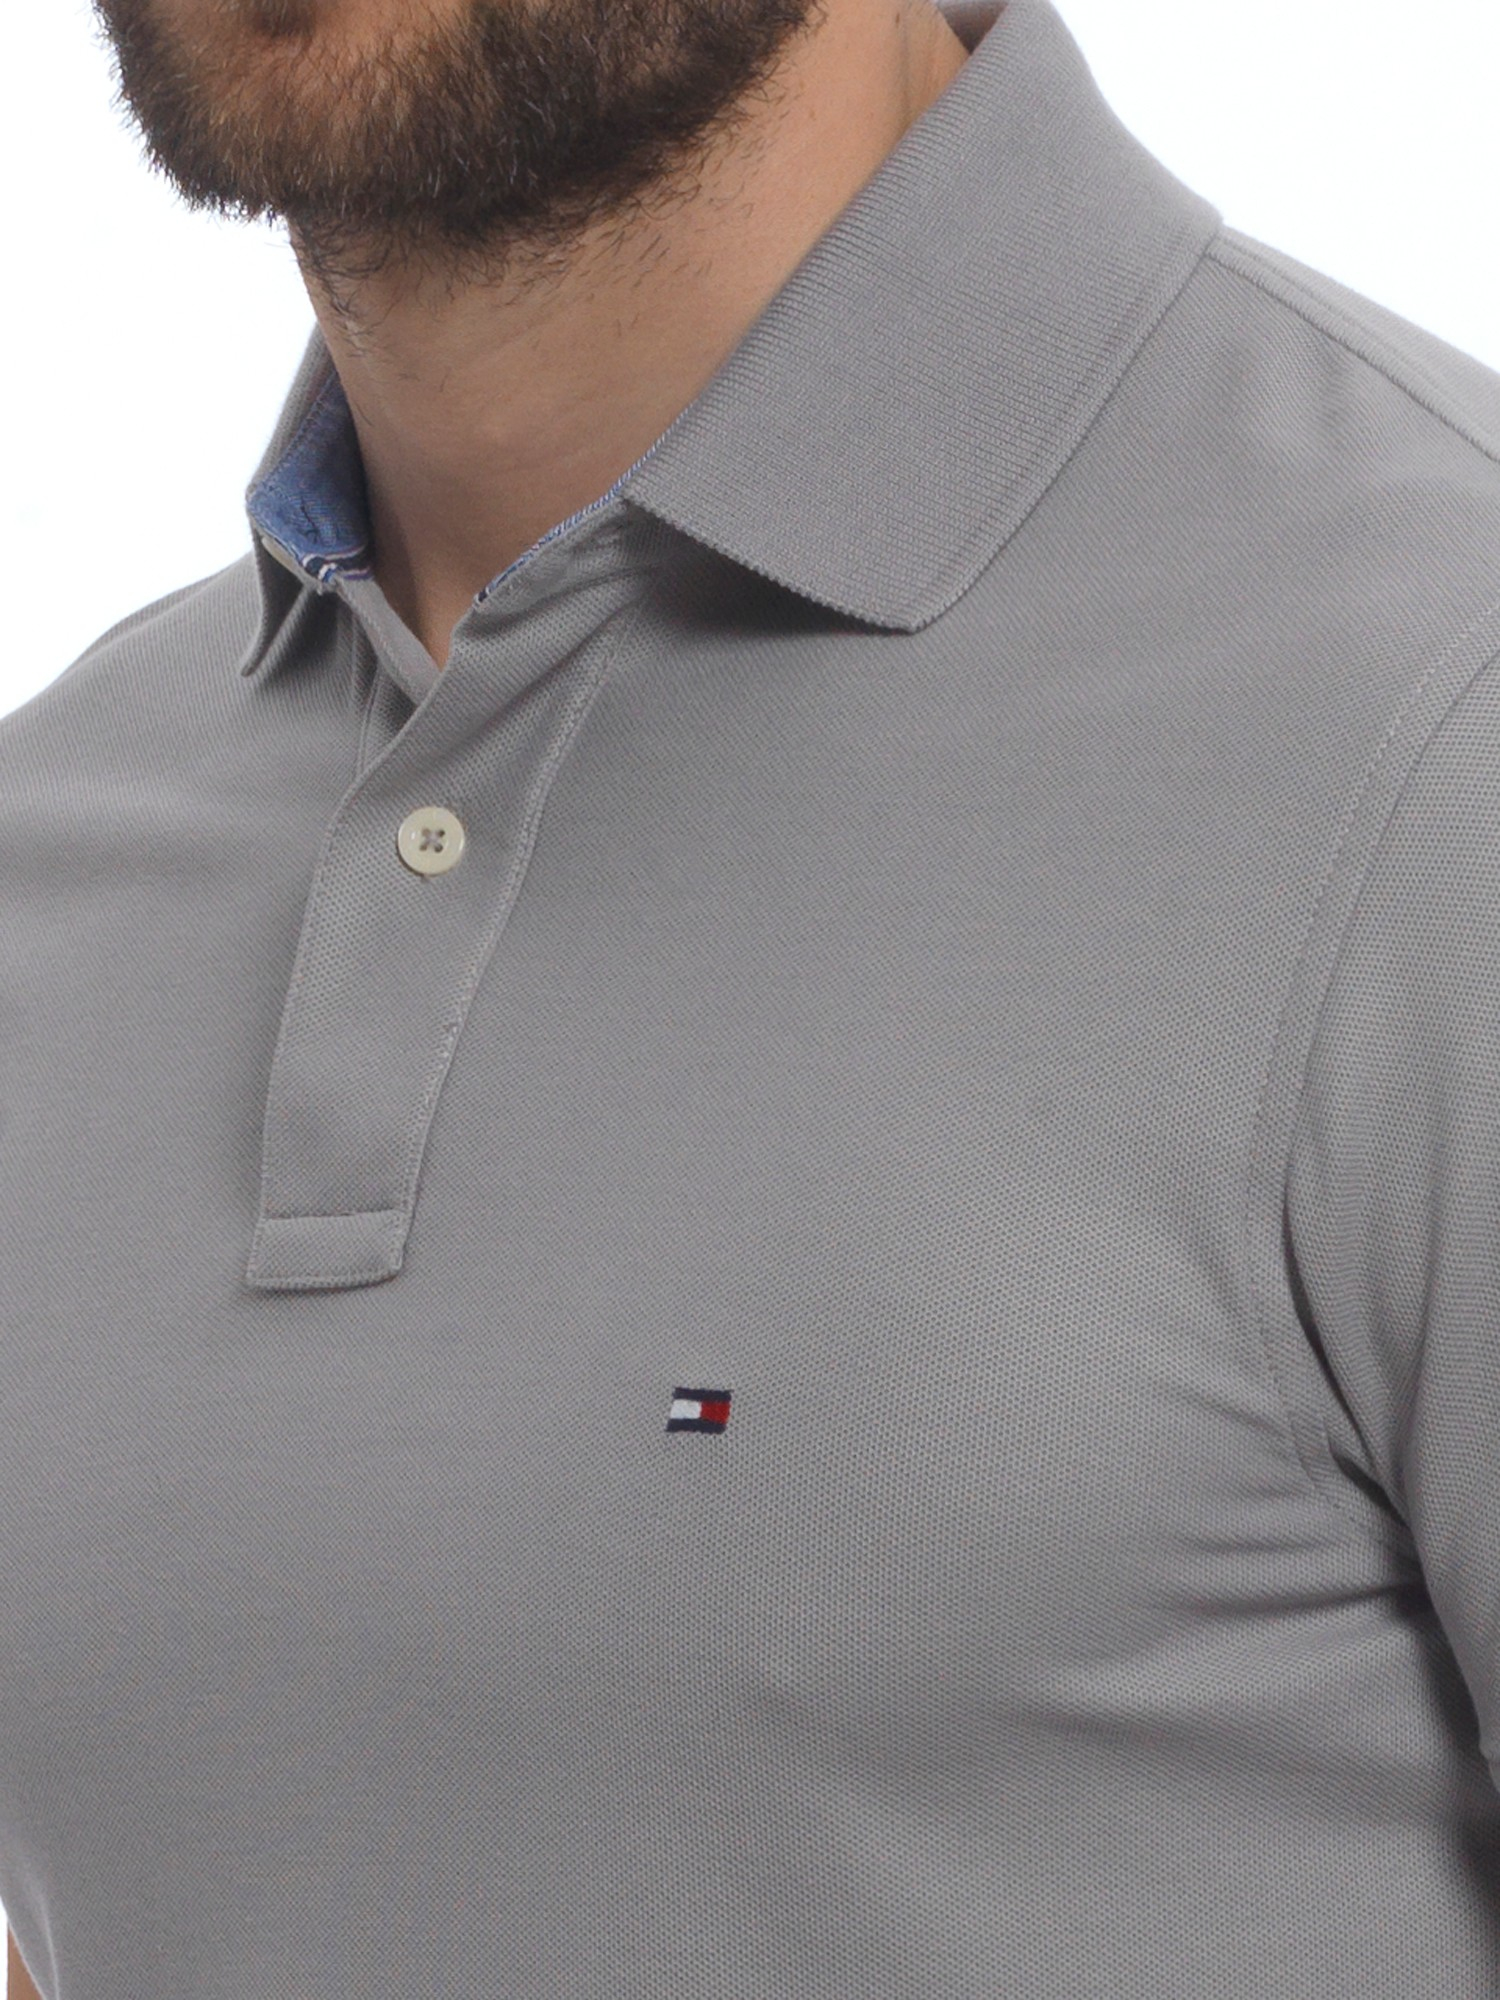 Tommy Hilfiger Cotton Performance Polo Shirt in Grey for Men - Lyst